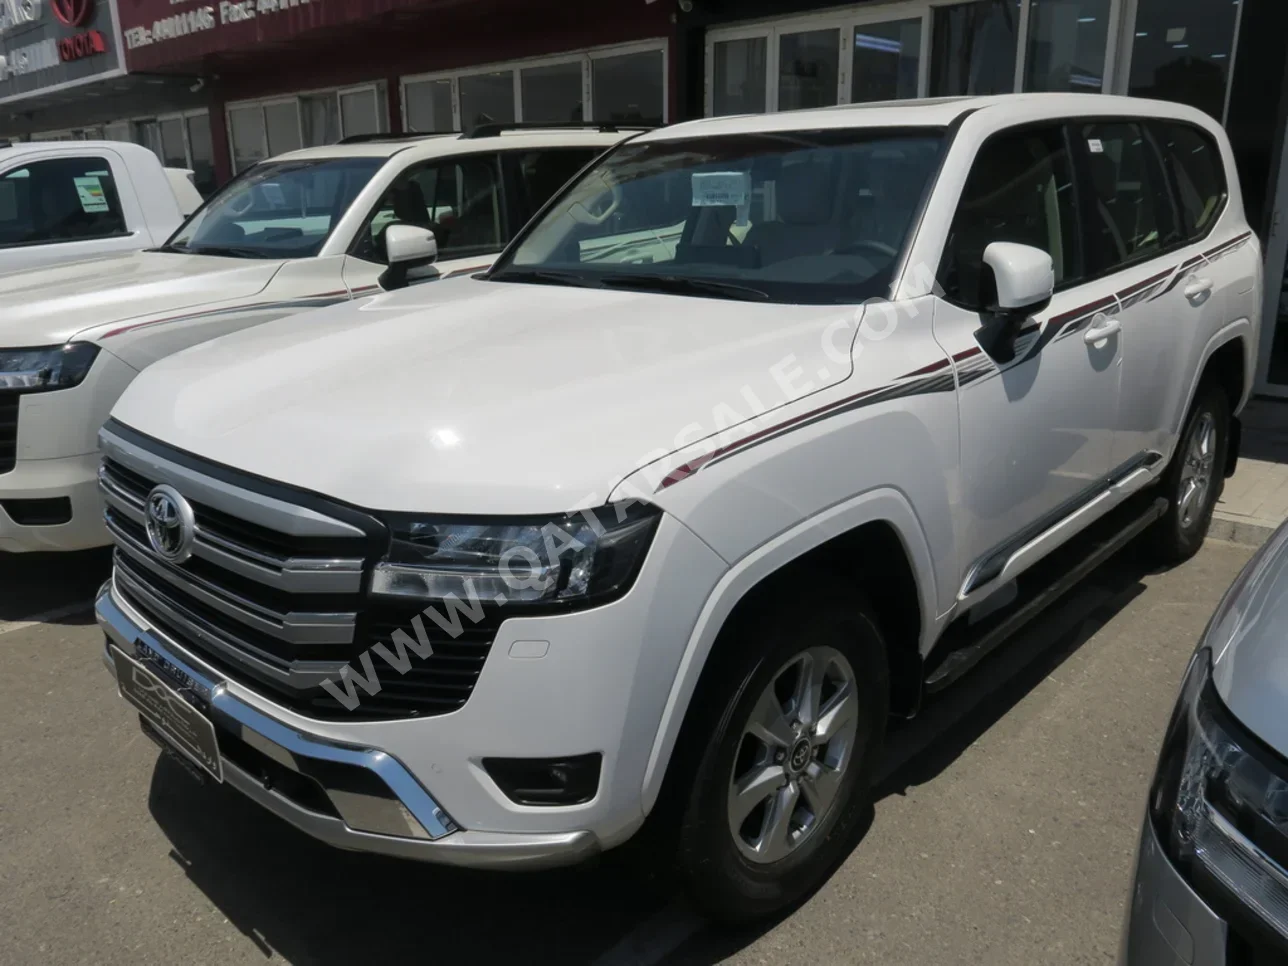 Toyota  Land Cruiser  GXR  2024  Automatic  400 Km  6 Cylinder  Four Wheel Drive (4WD)  SUV  White  With Warranty